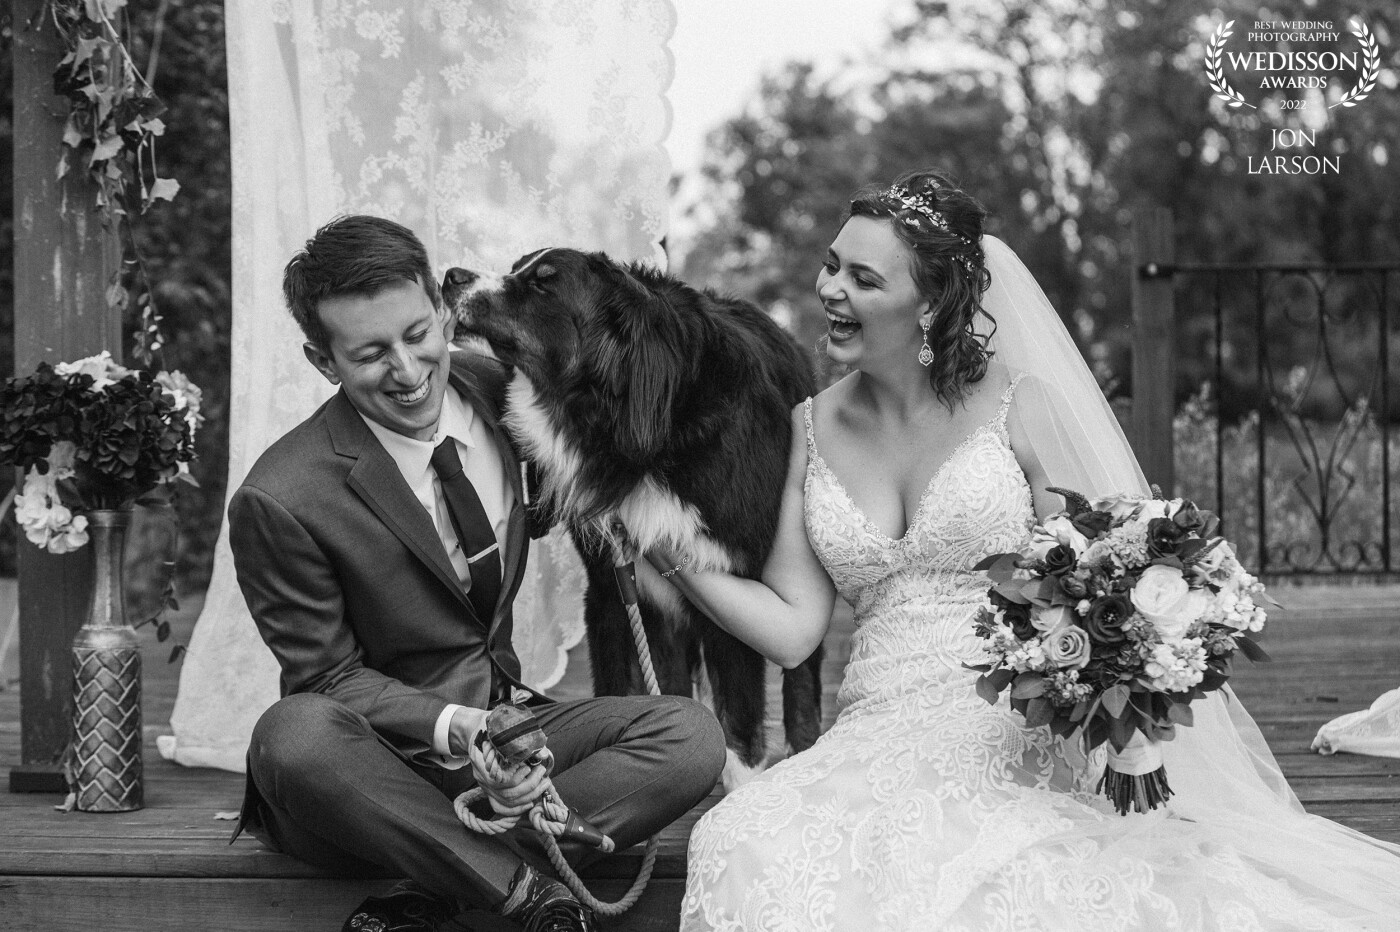 This shot took place at the alter just after ceremony. The bride and groom were sharing a moment waiting to do family formals with their dog. I kept focused on the three knowing something special was about to happen.